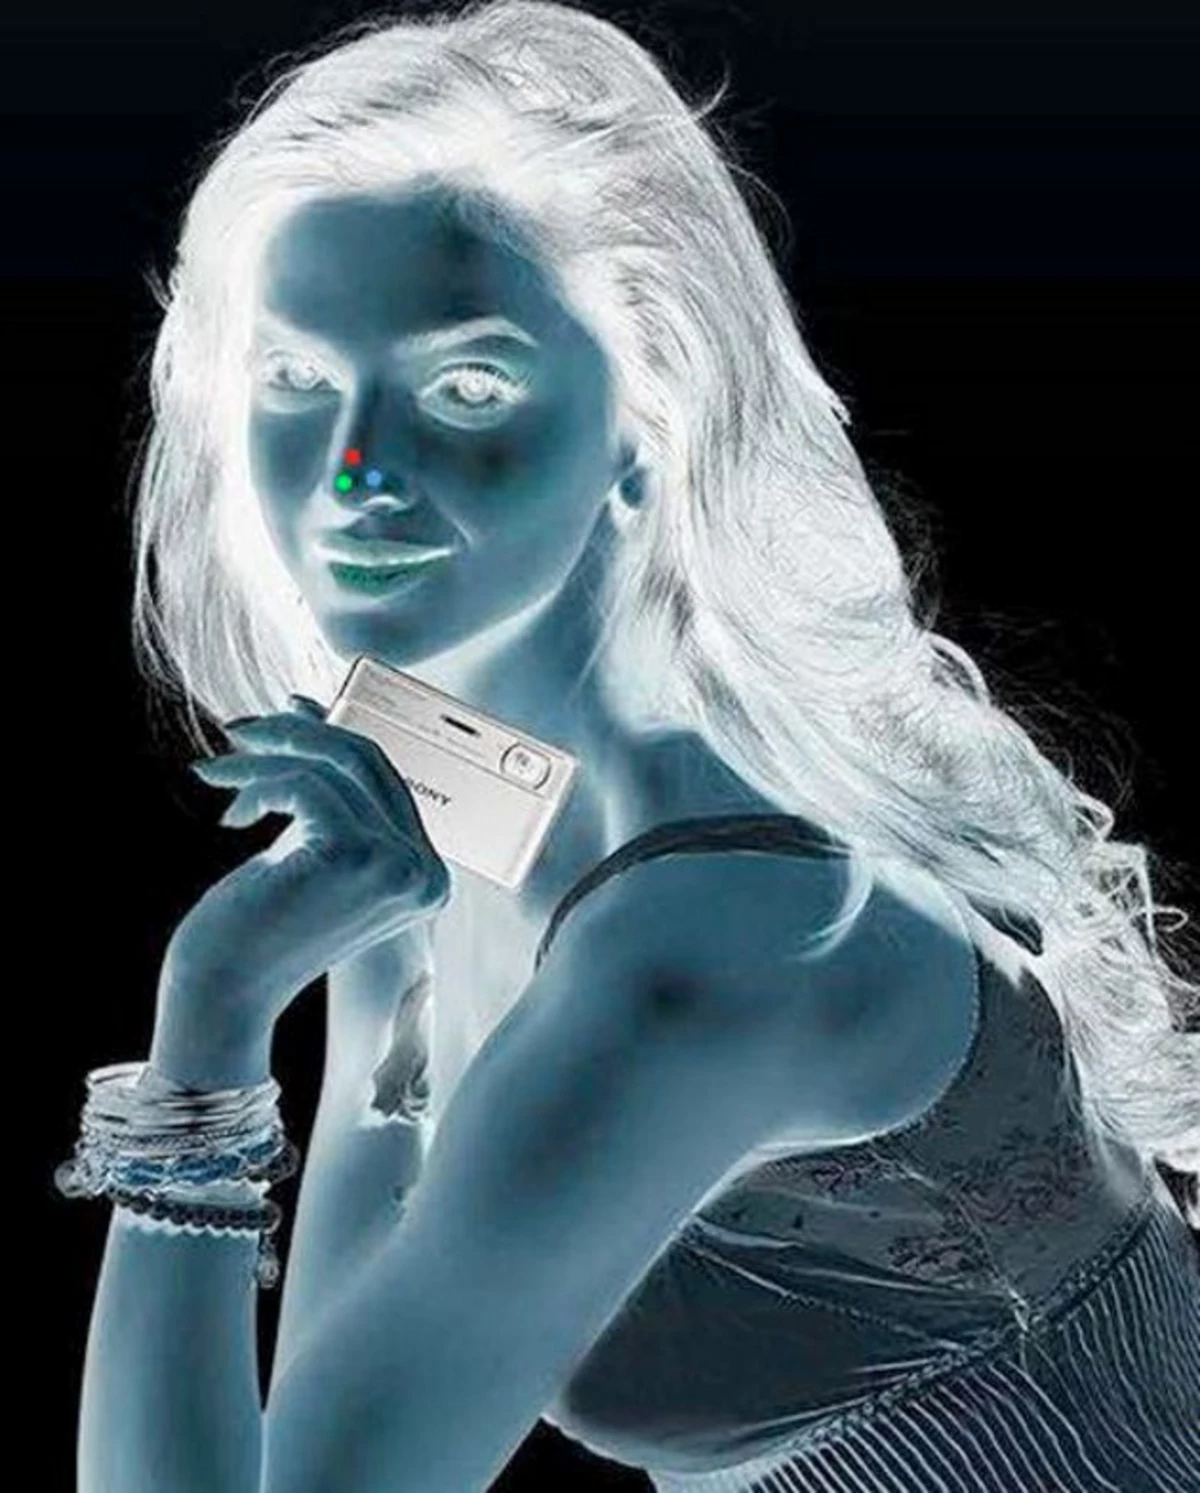 A Really Really Cool Optical Illusion Photo